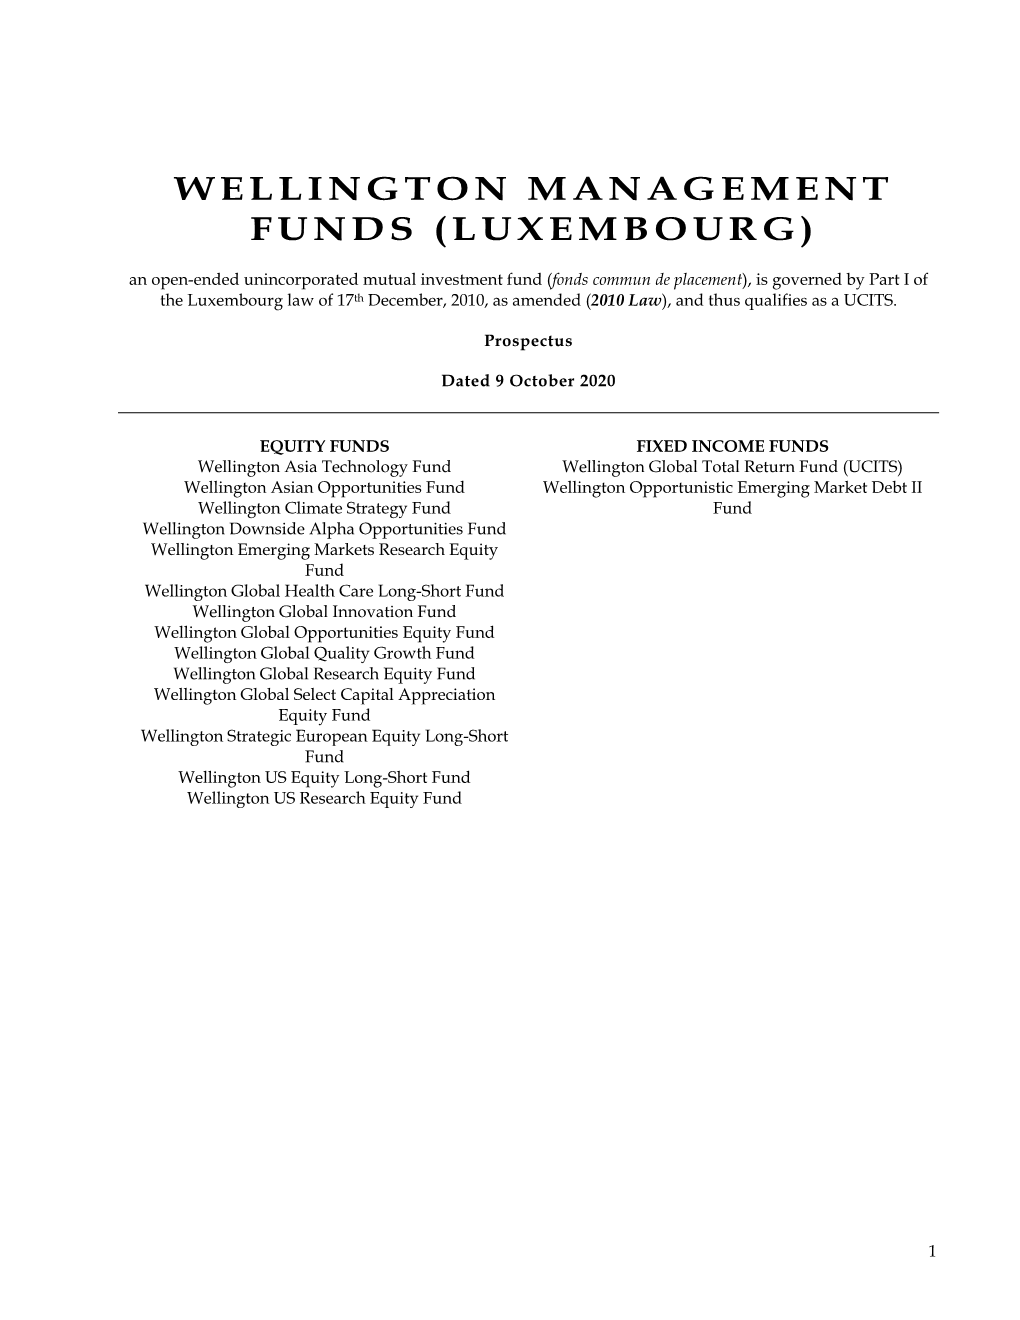 Wellington Management Funds (Luxembourg)